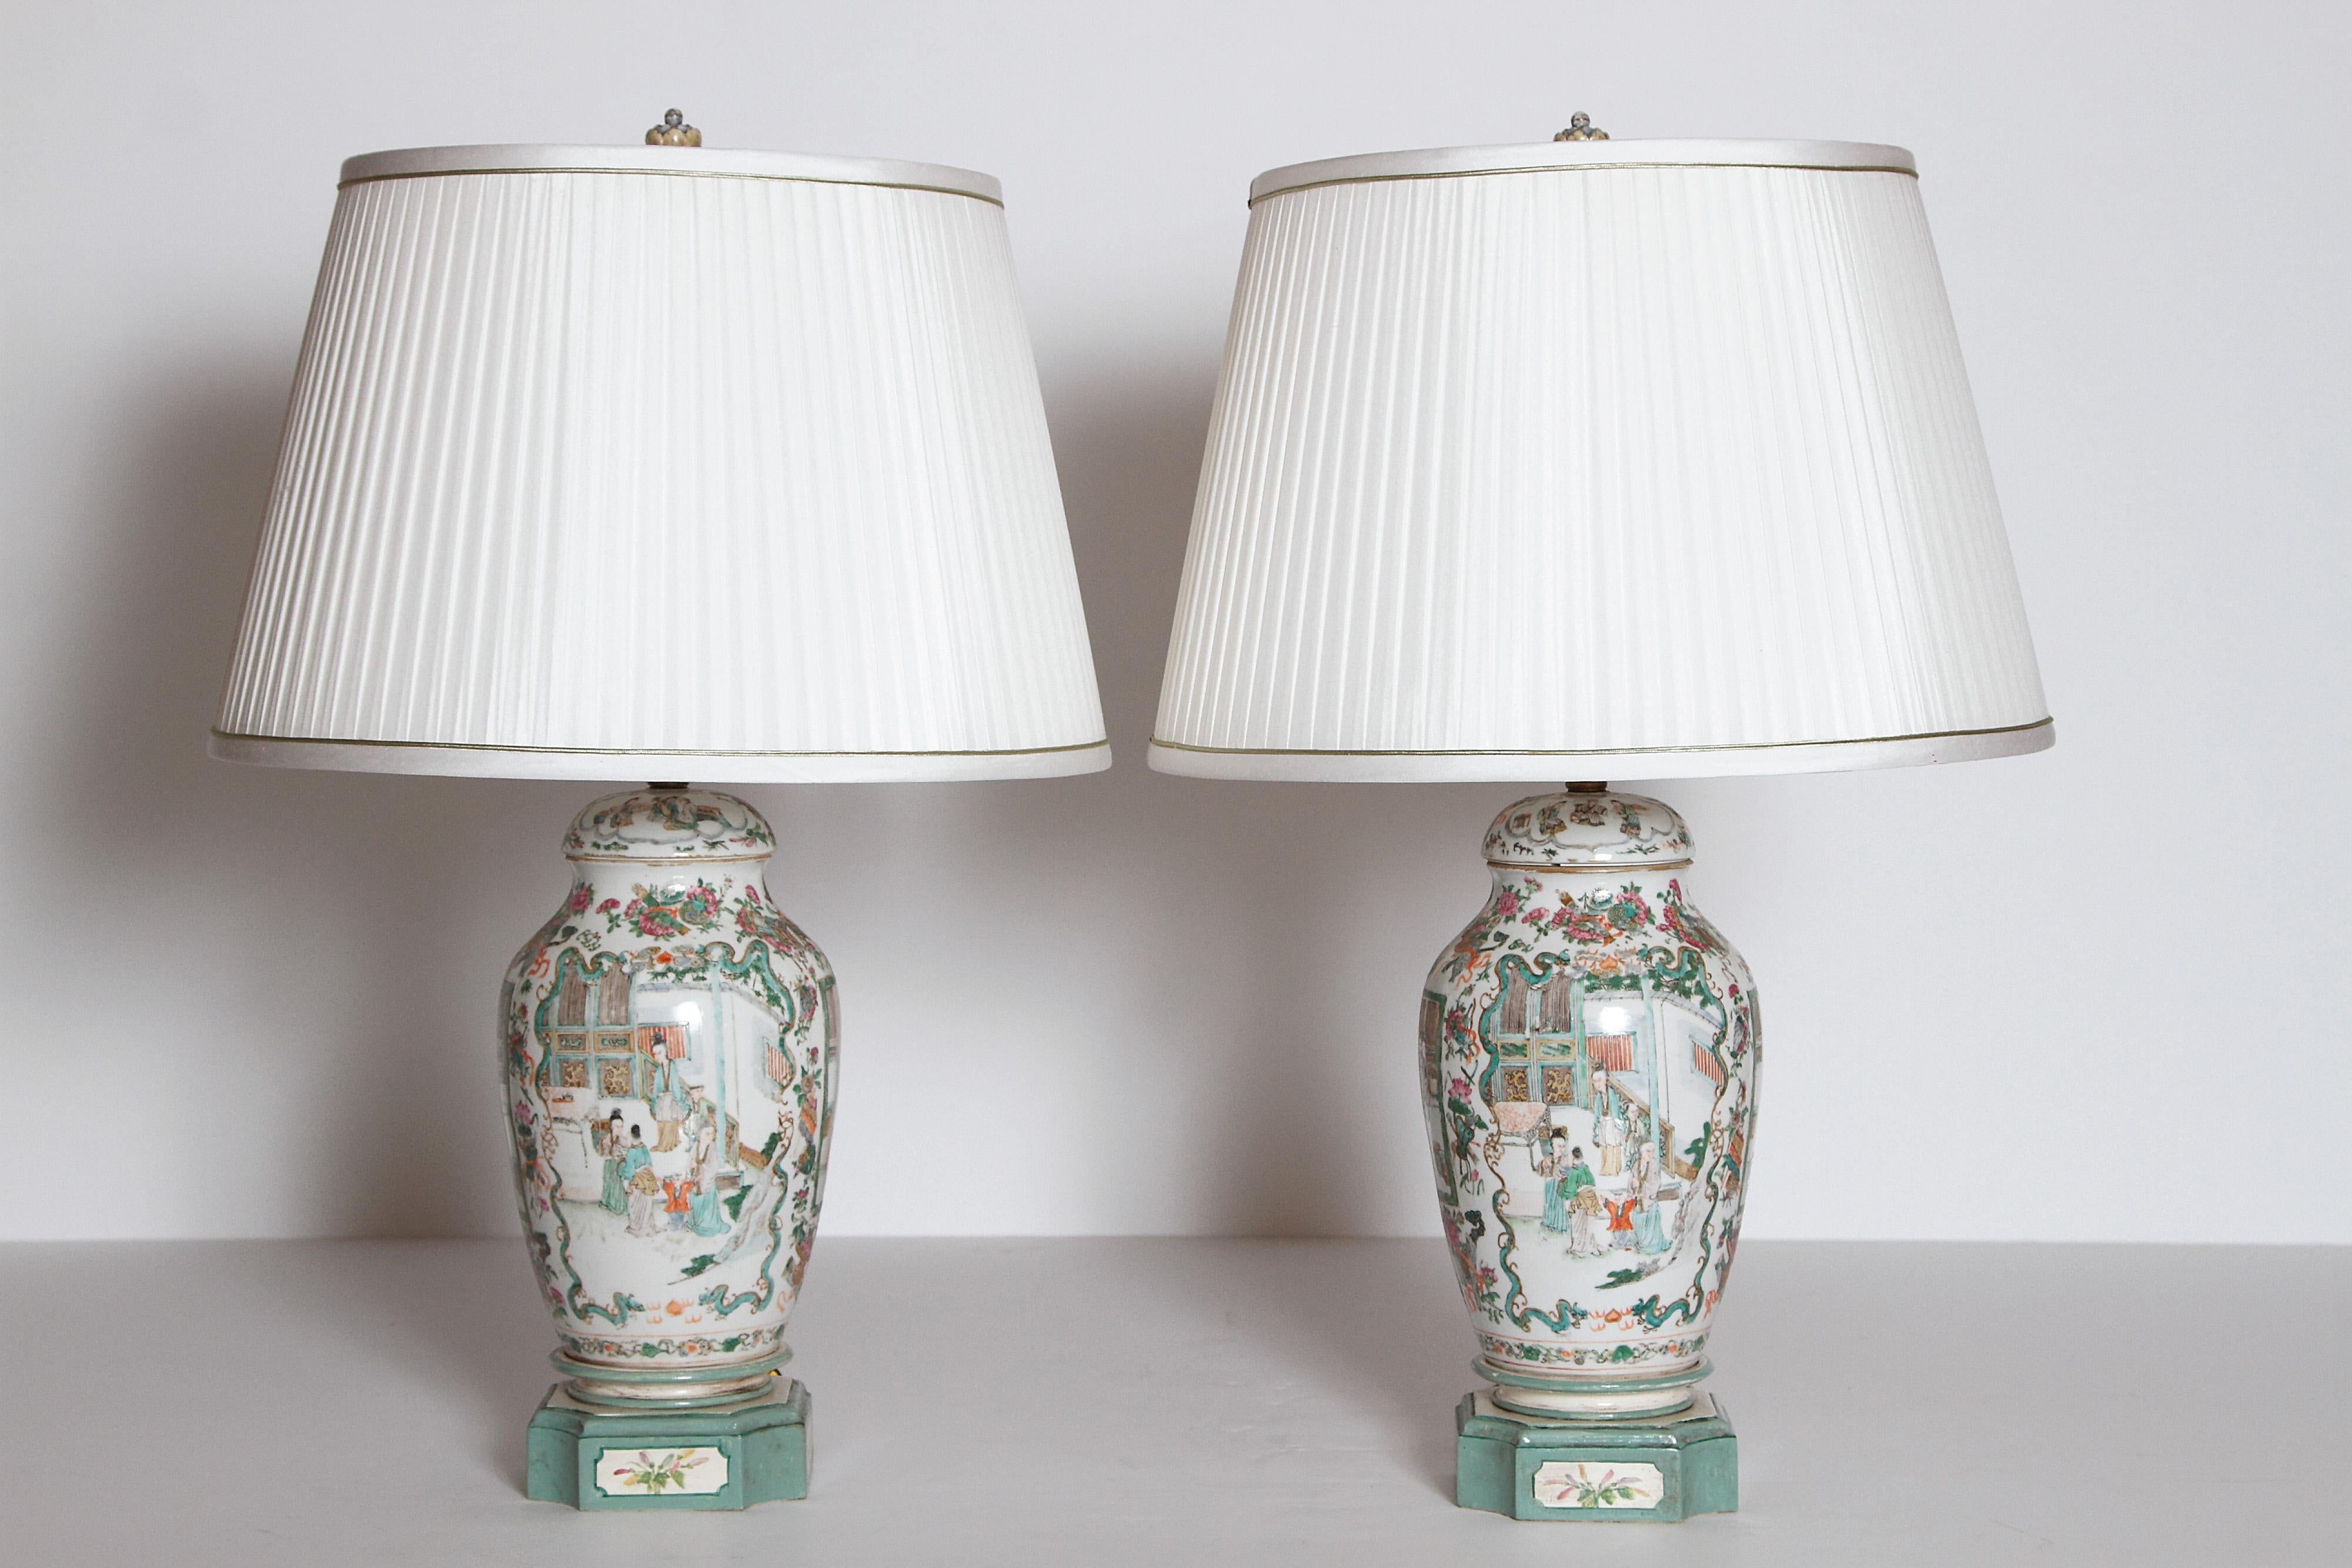 A pair of Chinese porcelain lidded jars as lamps, white porcelain with green and orange coloration. People and flowers in cartouches. Bases are painted to complement the vases, early 19th century, China.

With custom pleated shades with